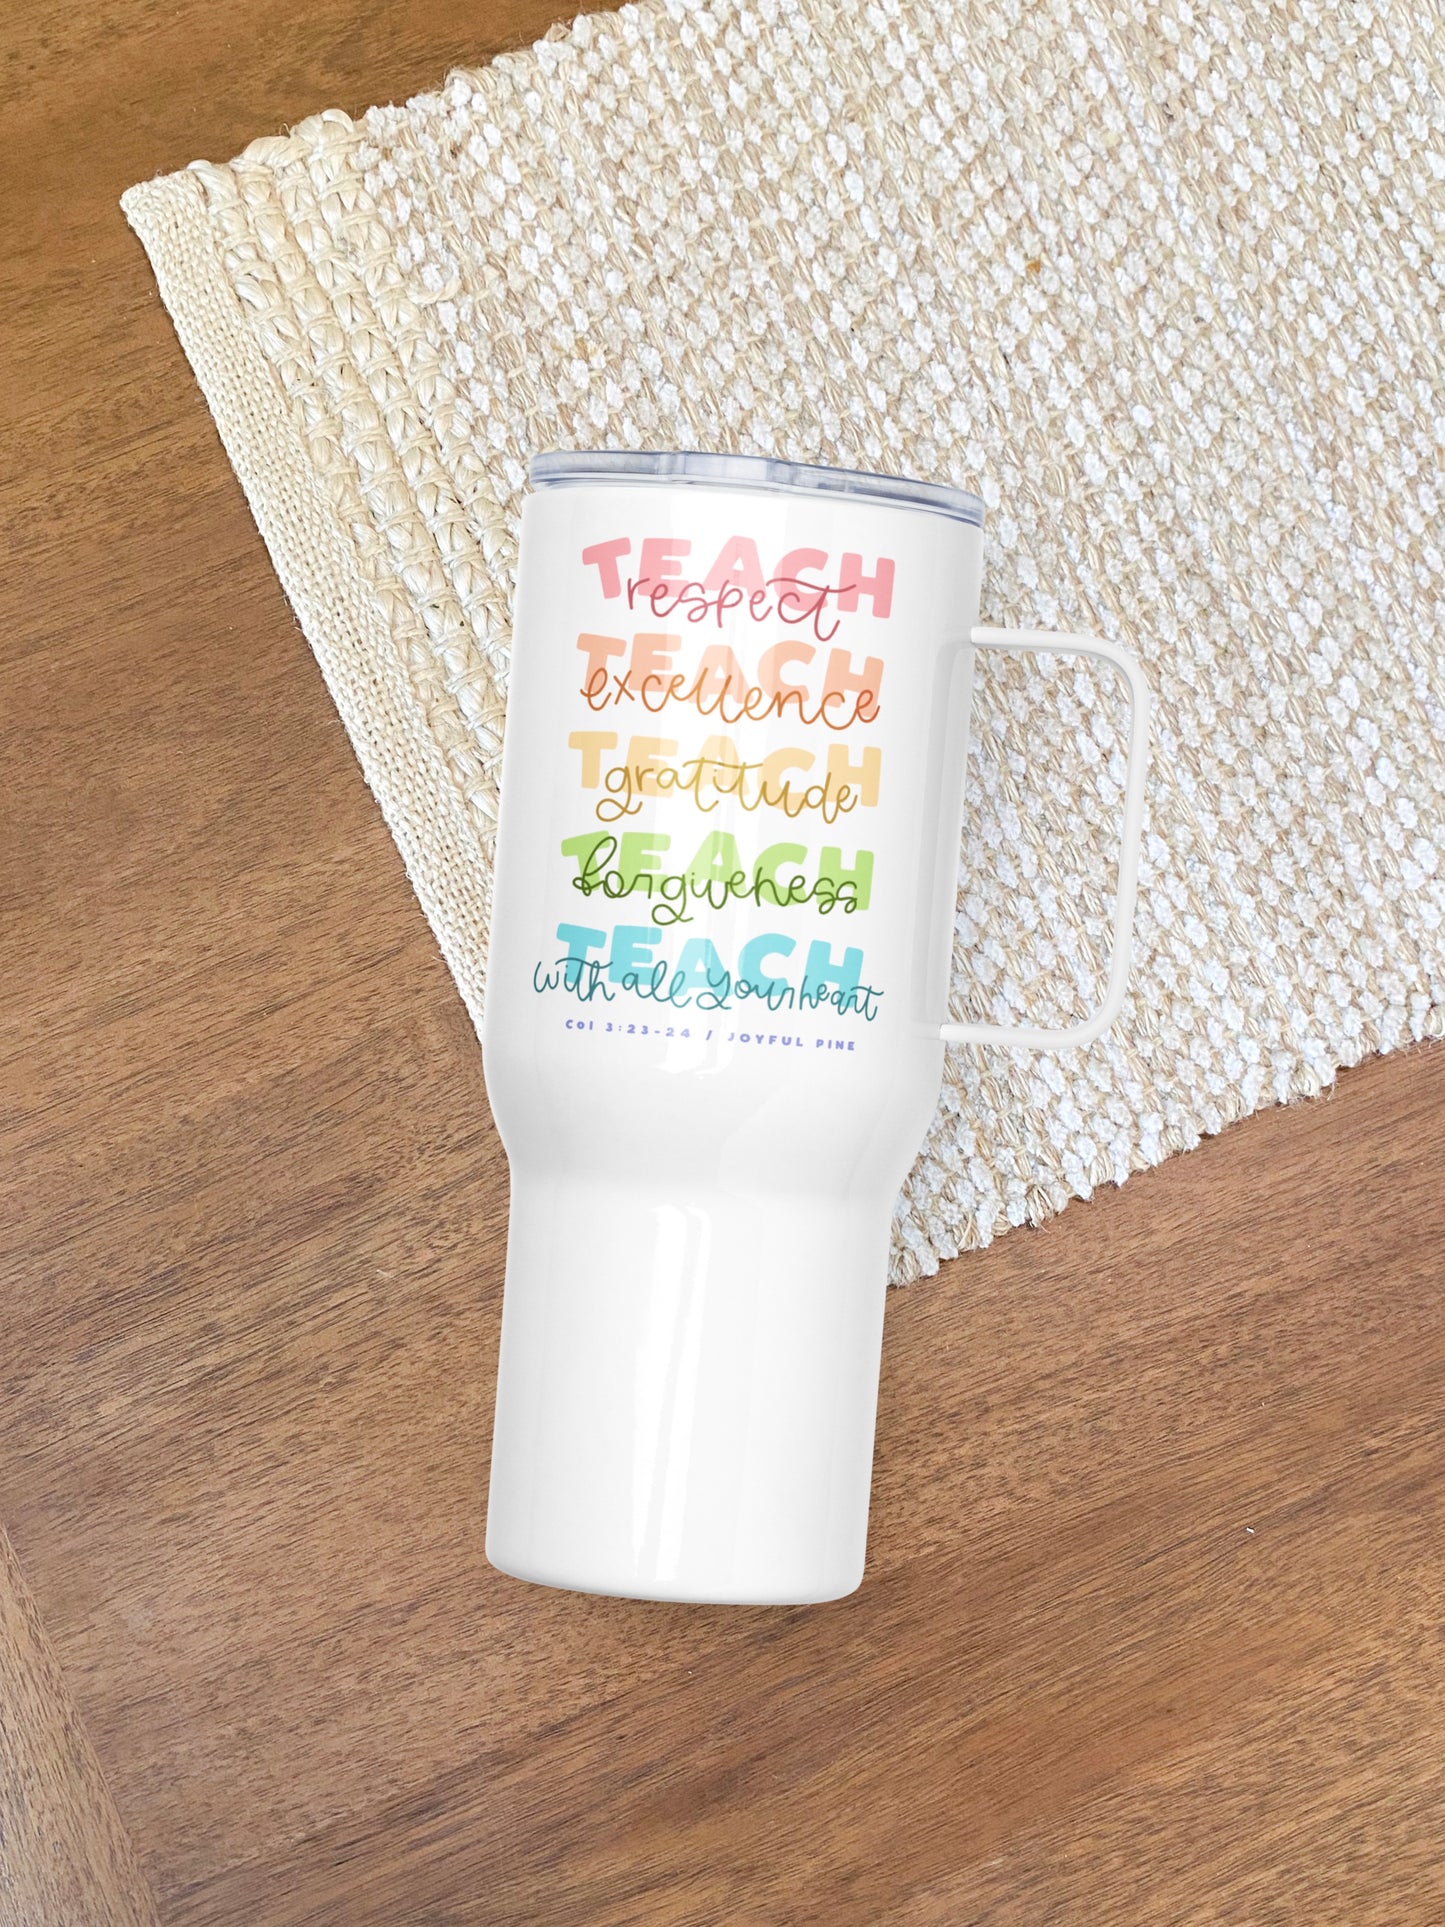 Teach With All Your Heart Stainless Steel Travel Mug